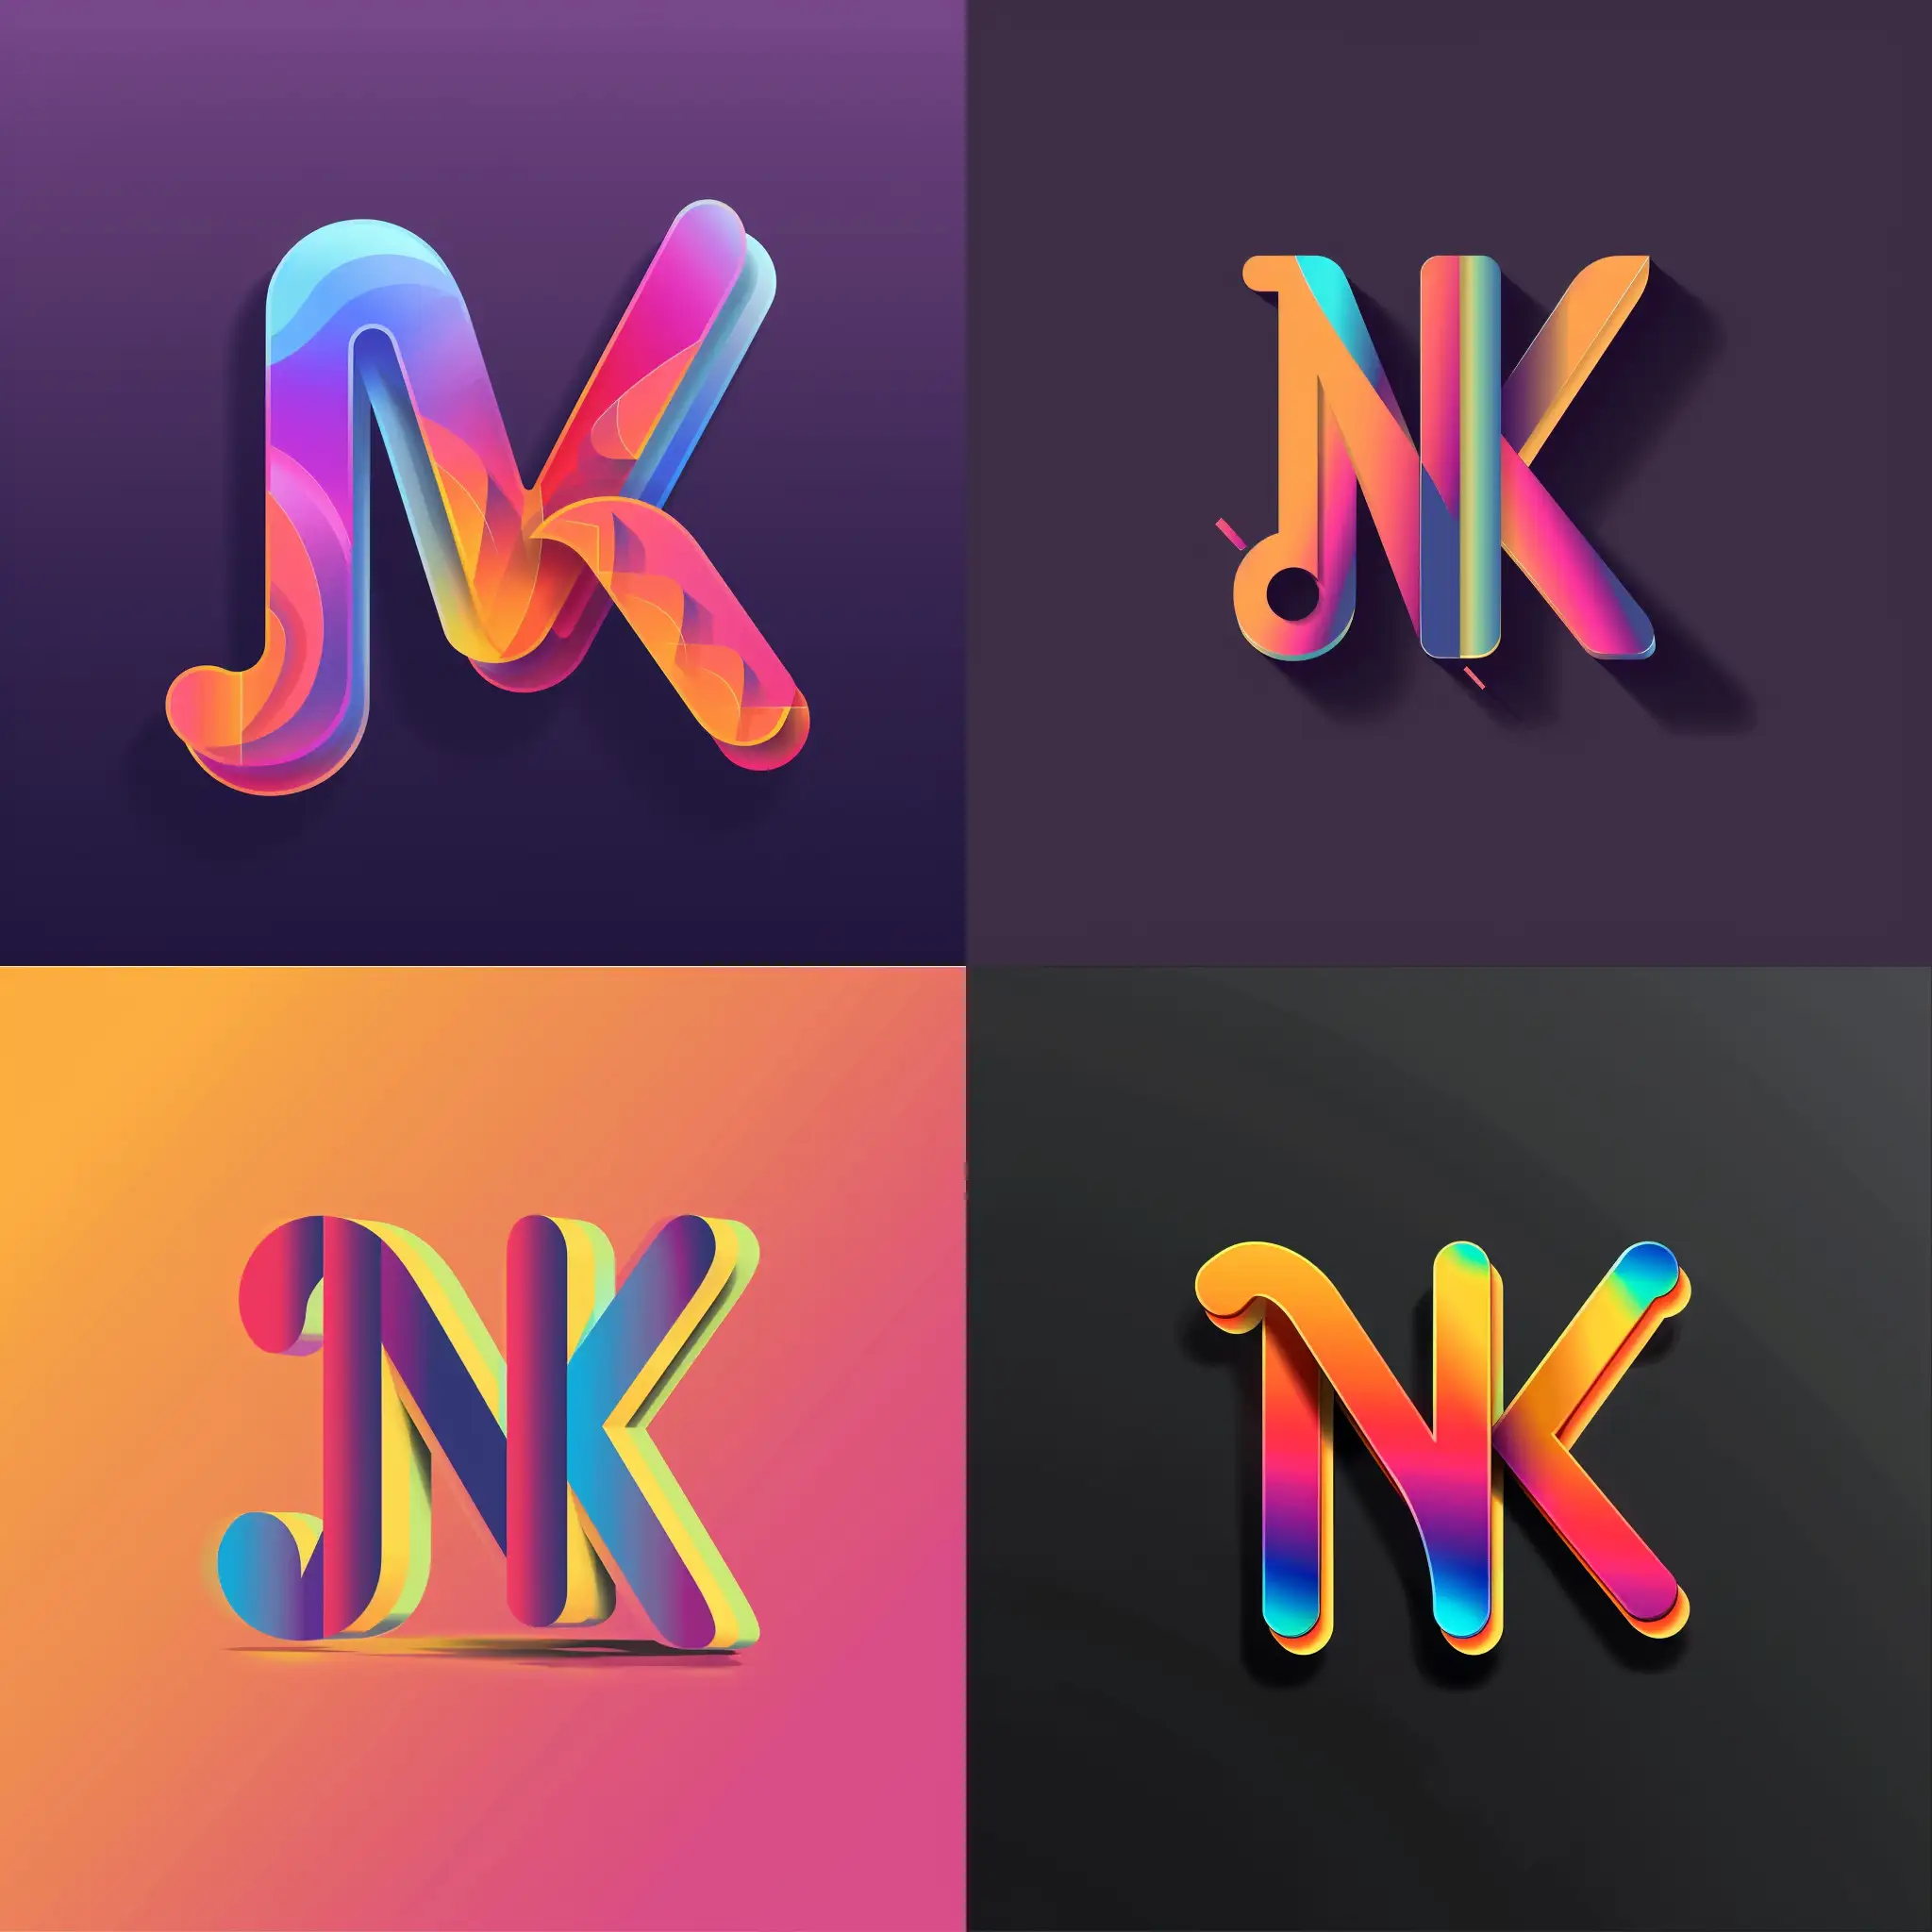 minimalist music app Logo with the letter N and K, multicolored, with gradient